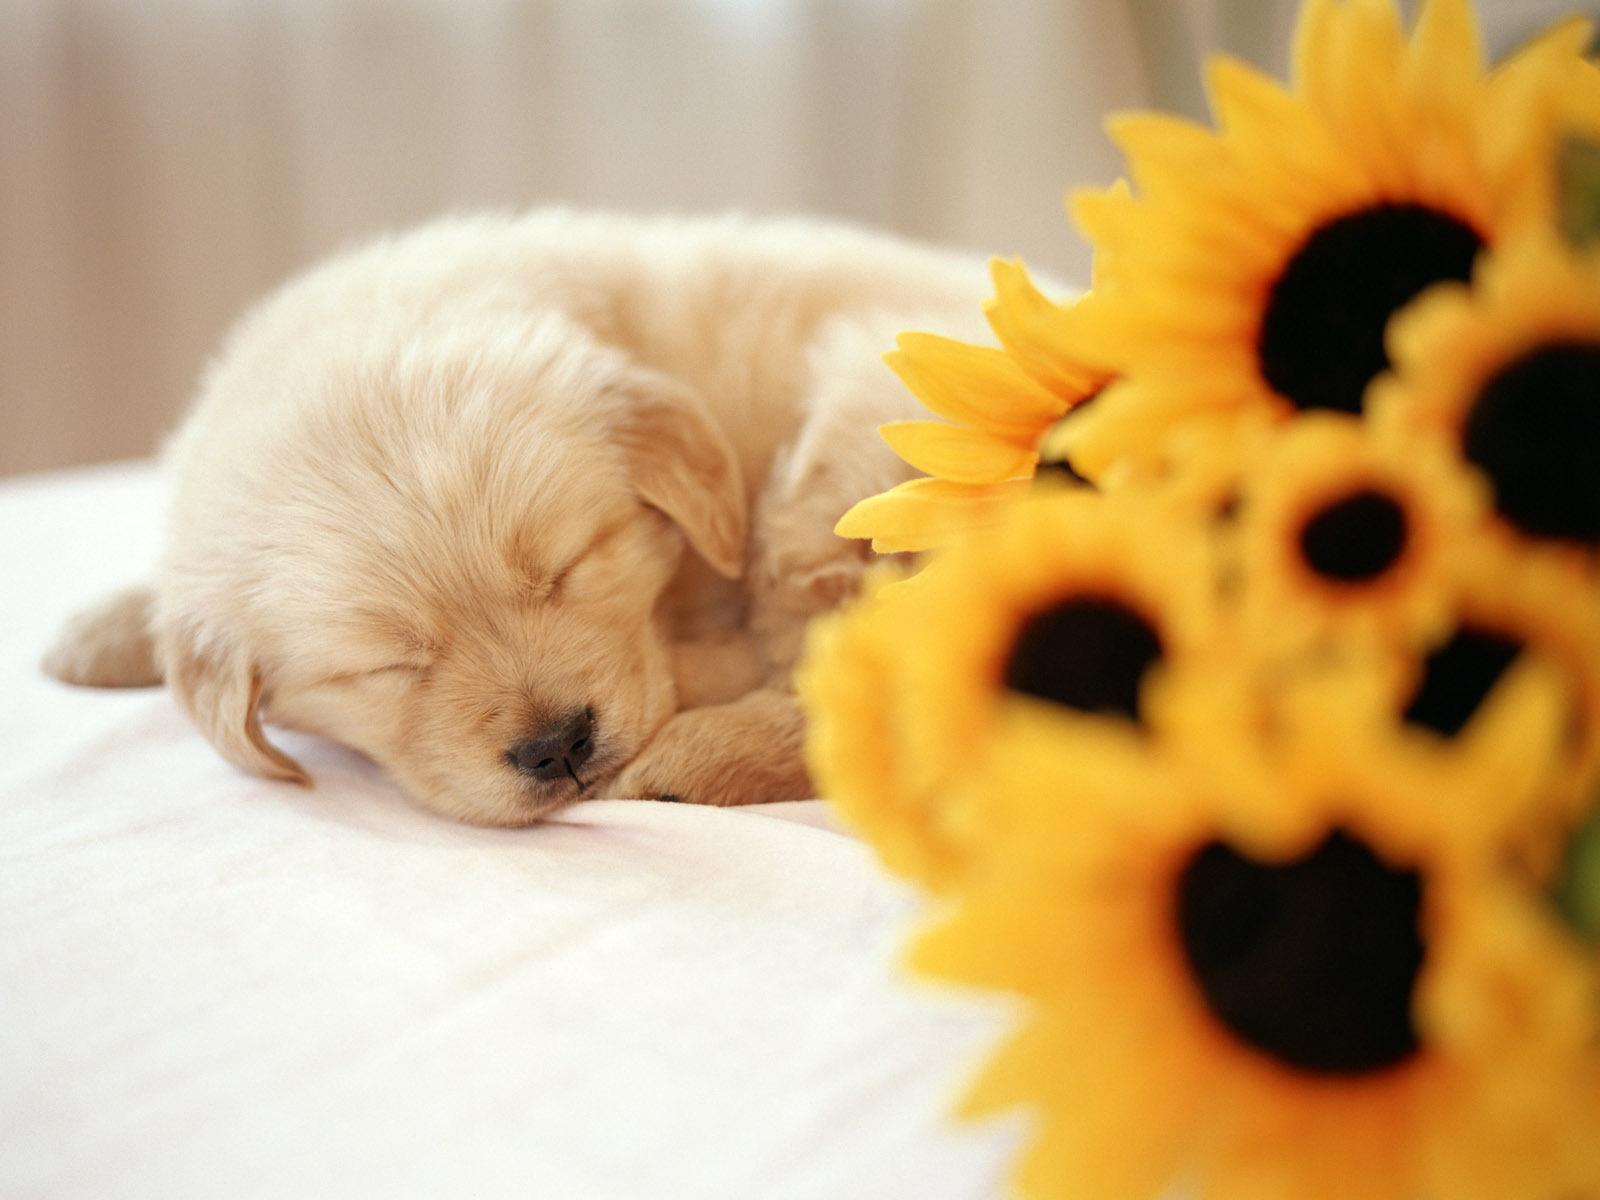 Teacup Puppy Wallpapers - Wallpaper Cave